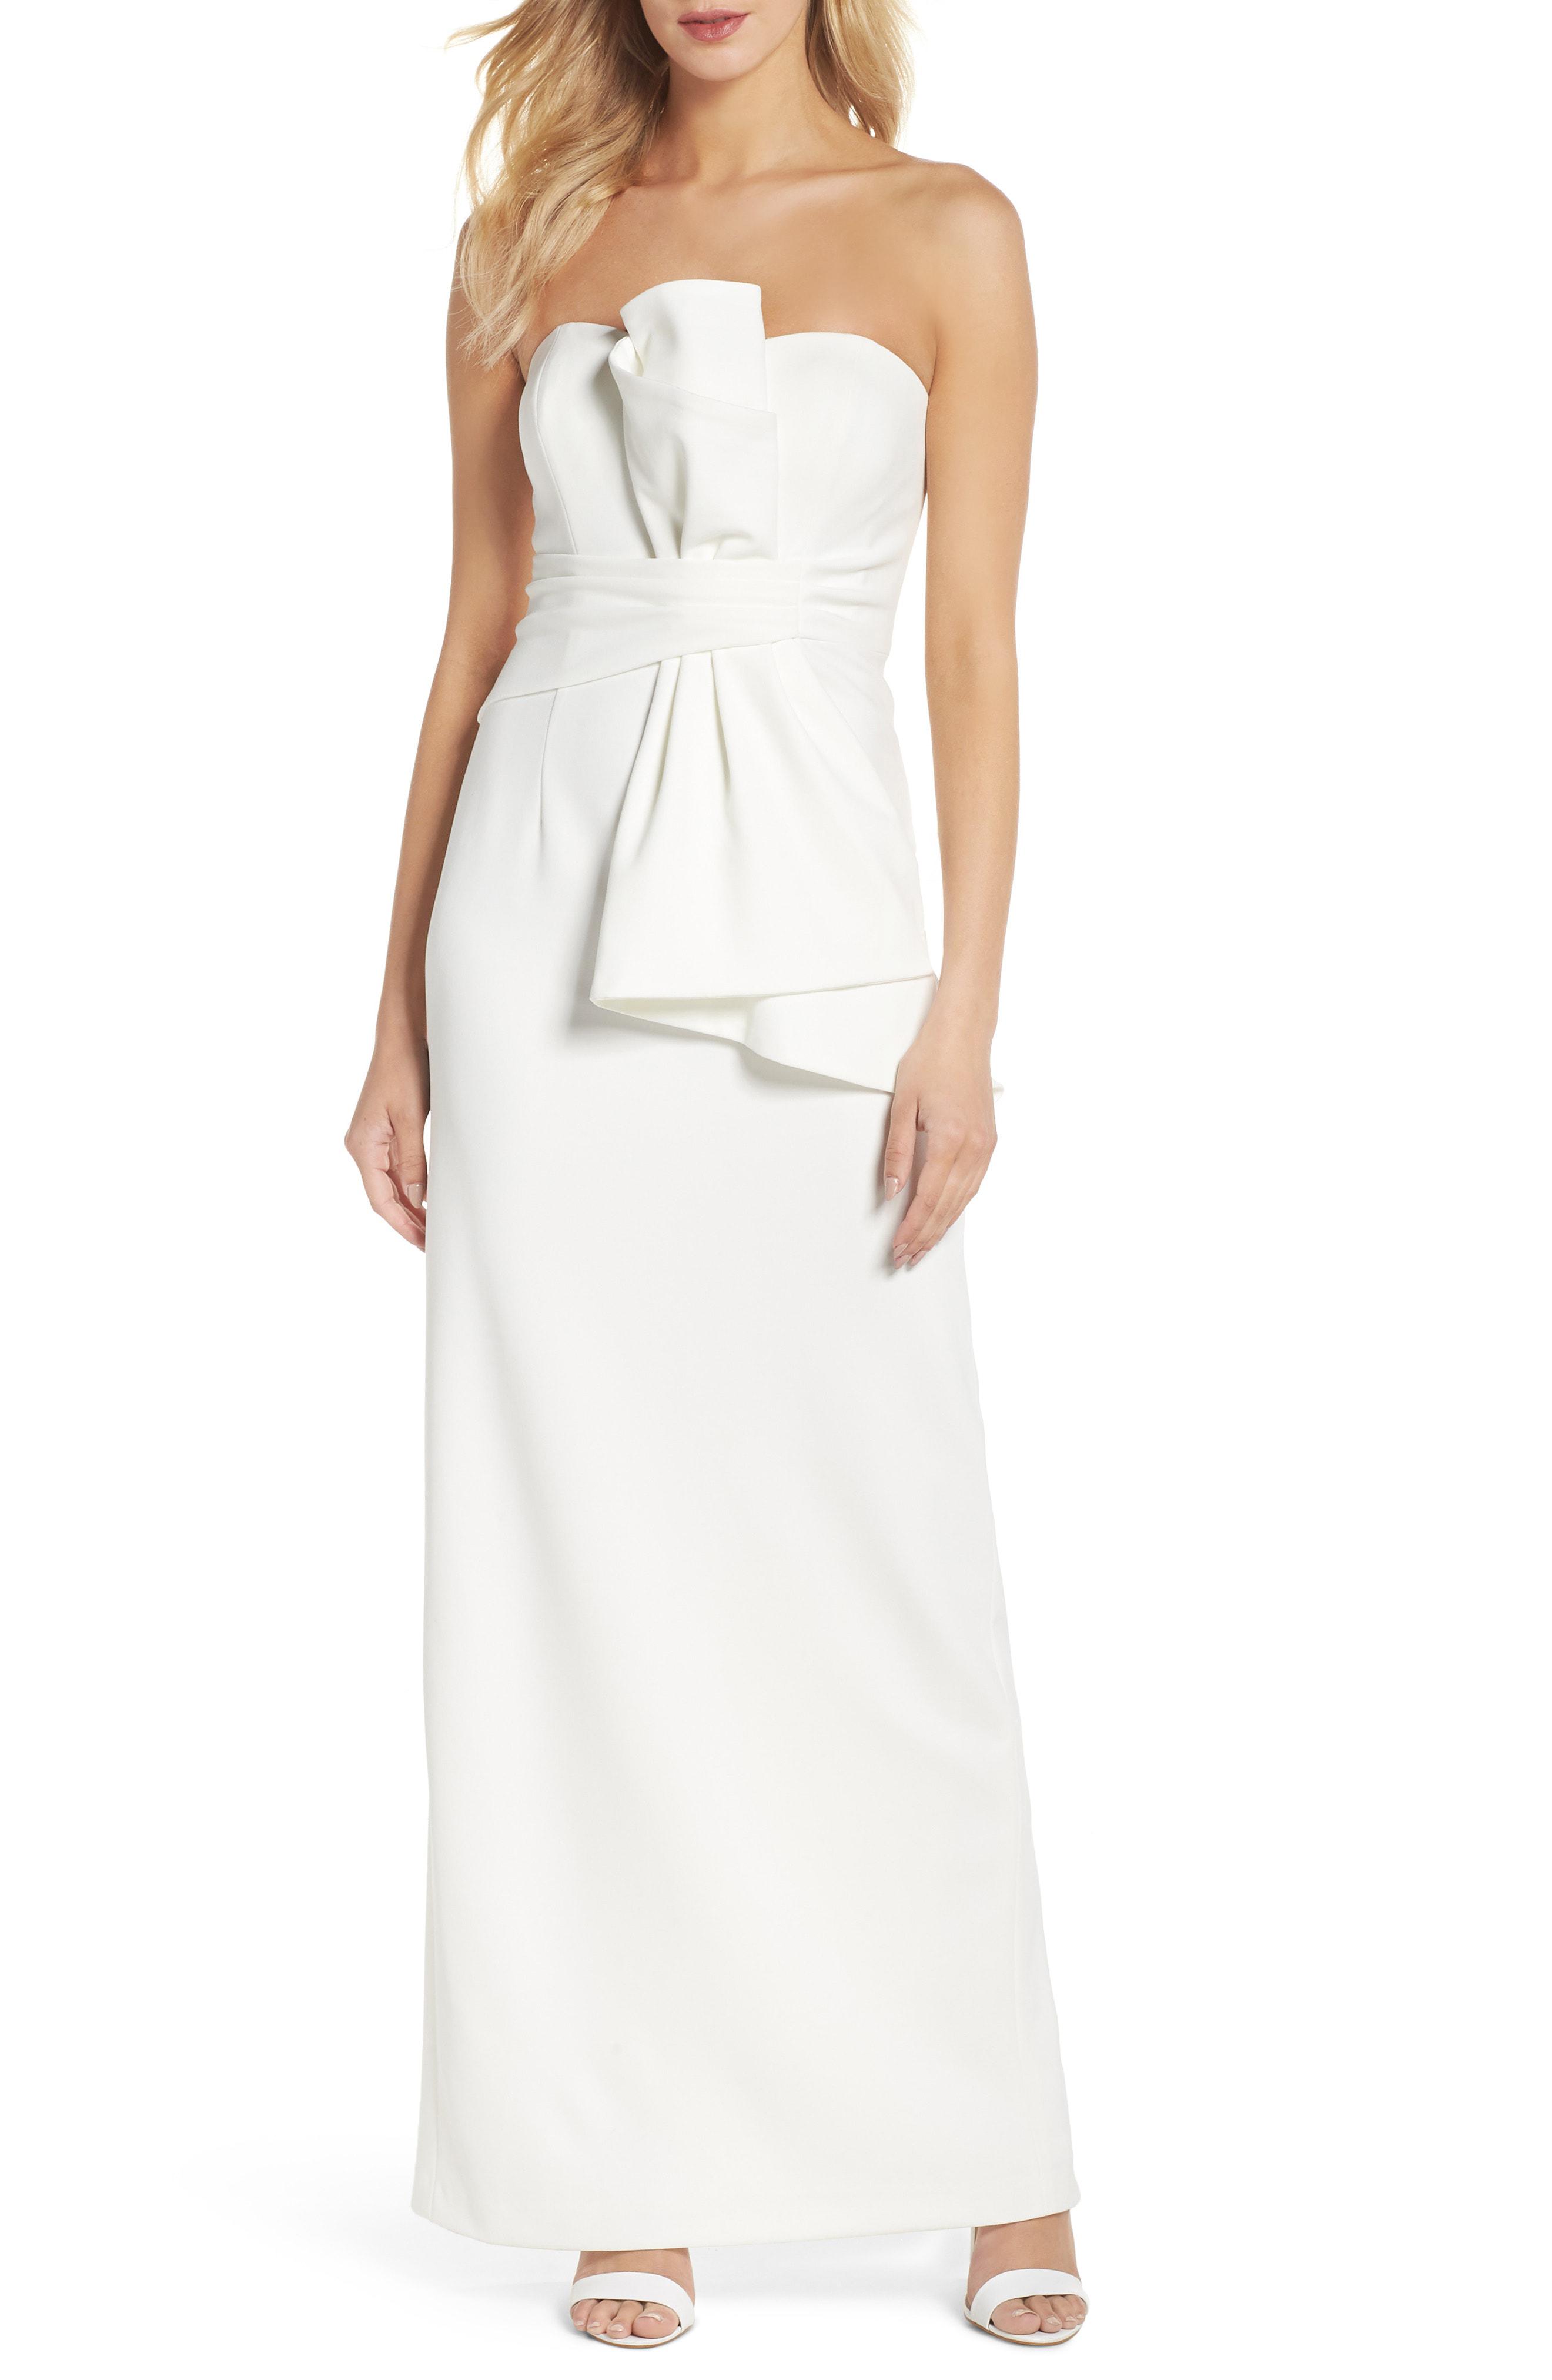 Lyst - Adrianna Papell Strapless Bow Column Gown in White